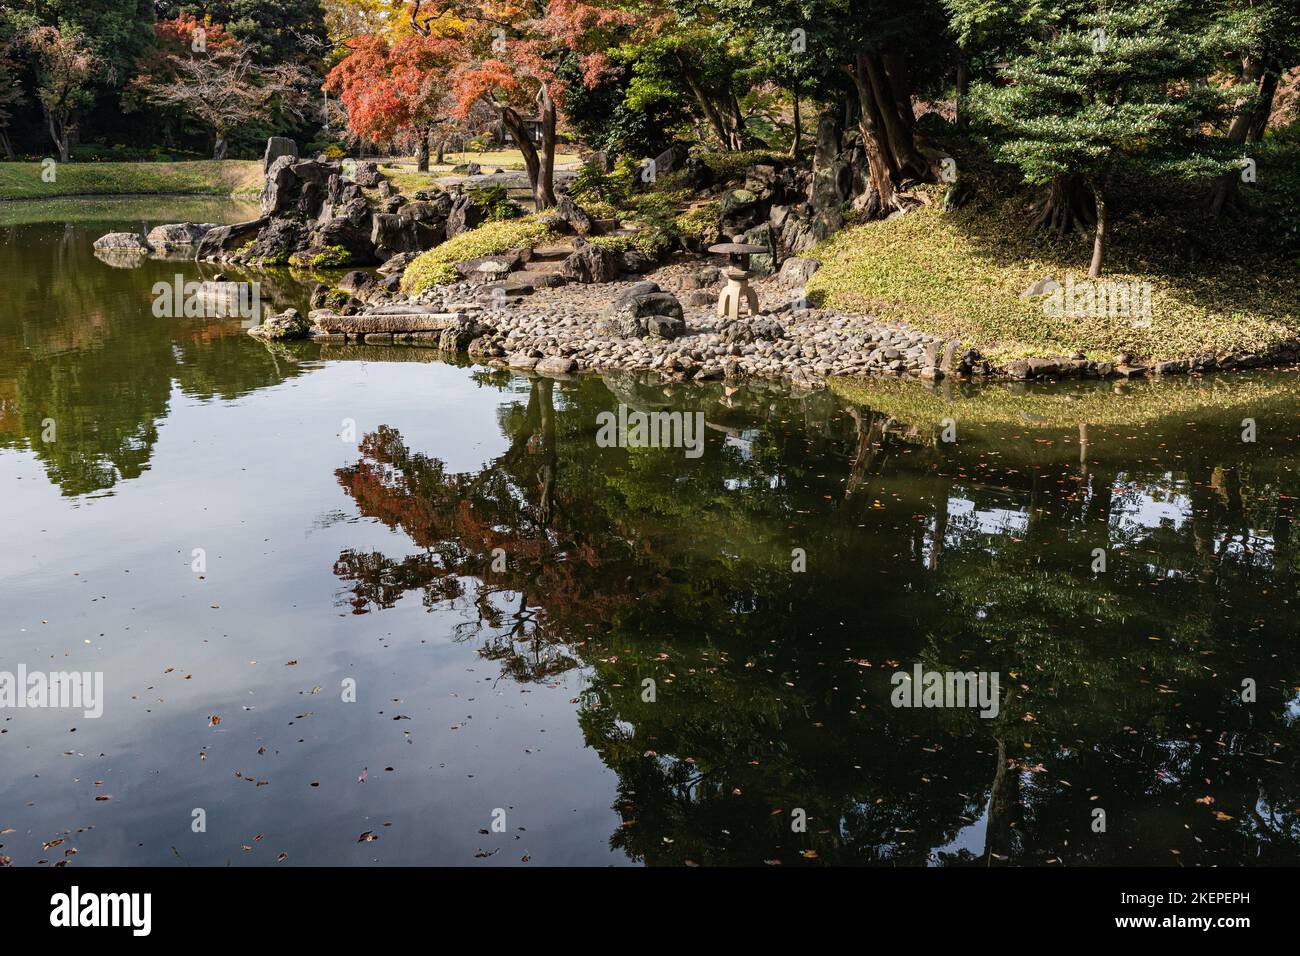 Koishikawa Korakuen Gardens is a strolling garden centered around a pond, reflecting the preference for the Chinese aesthetic with landscapes replicat Stock Photo